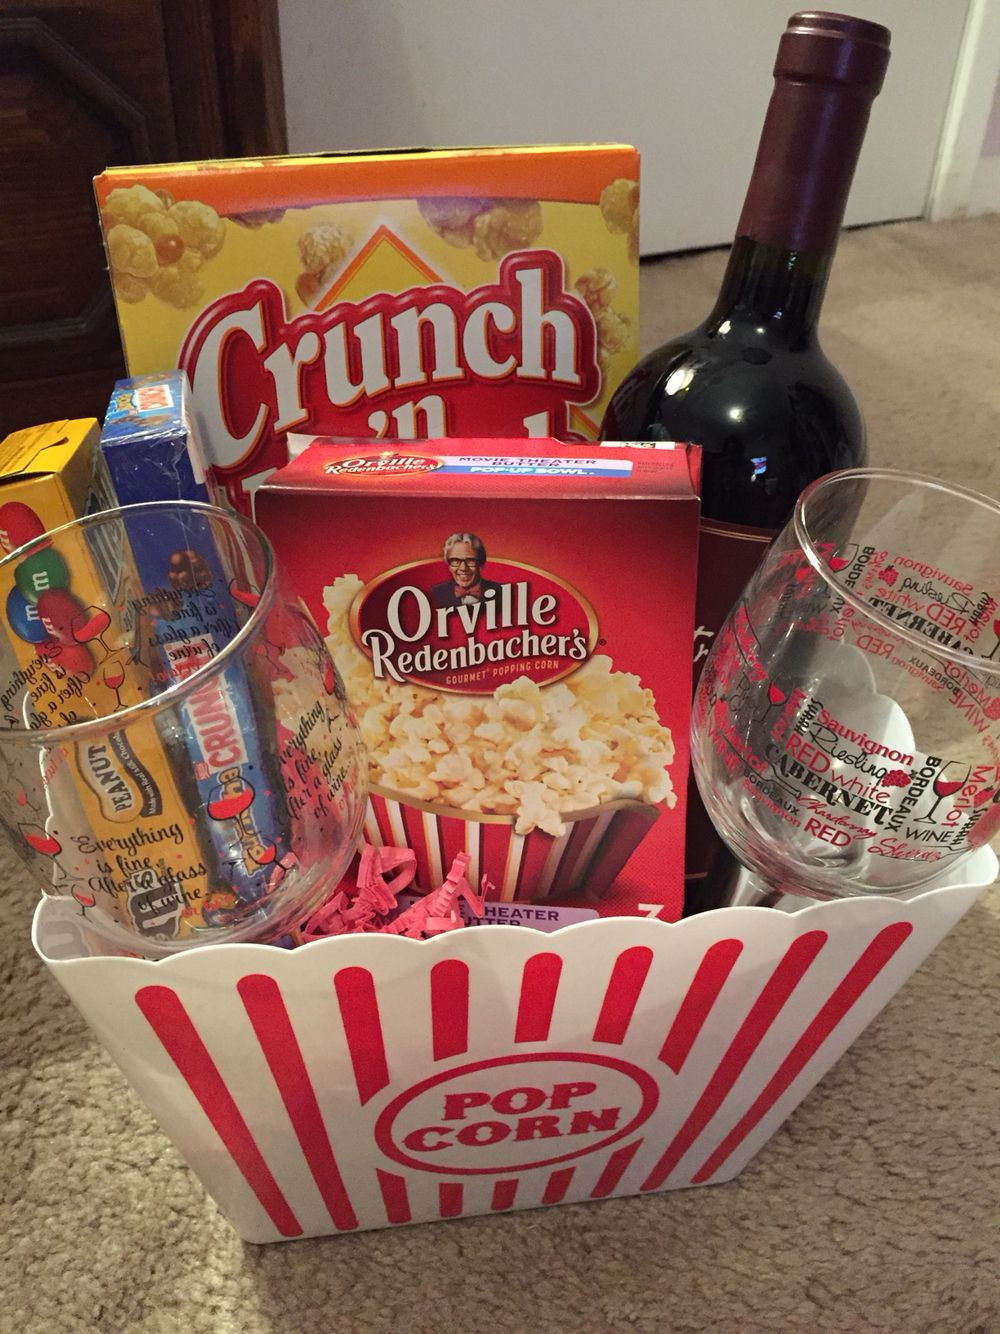 Ideas For A Movie Theater Gift Basket
 Movie night basket Gift basket ideas Christmas t too